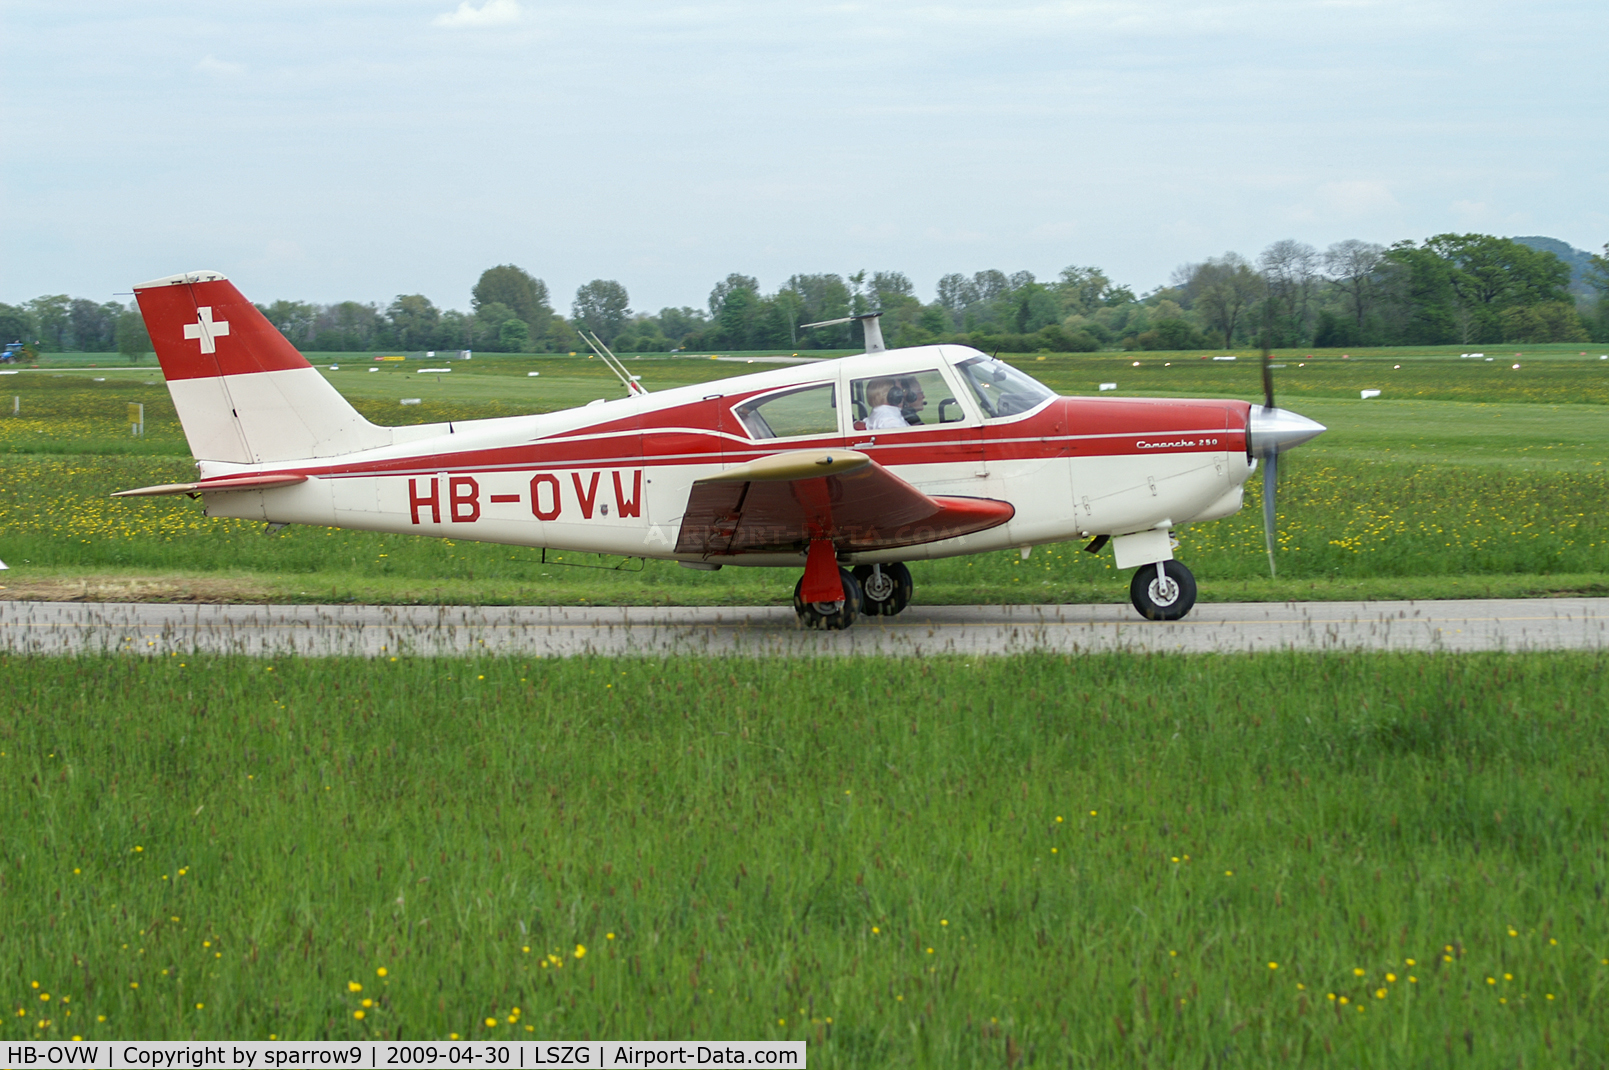 HB-OVW, 1963 Piper PA-24-250 Comanche Comanche C/N 24-3498, At Grenchen. HB-registered from 1963-09-02 until 2019-10-10.